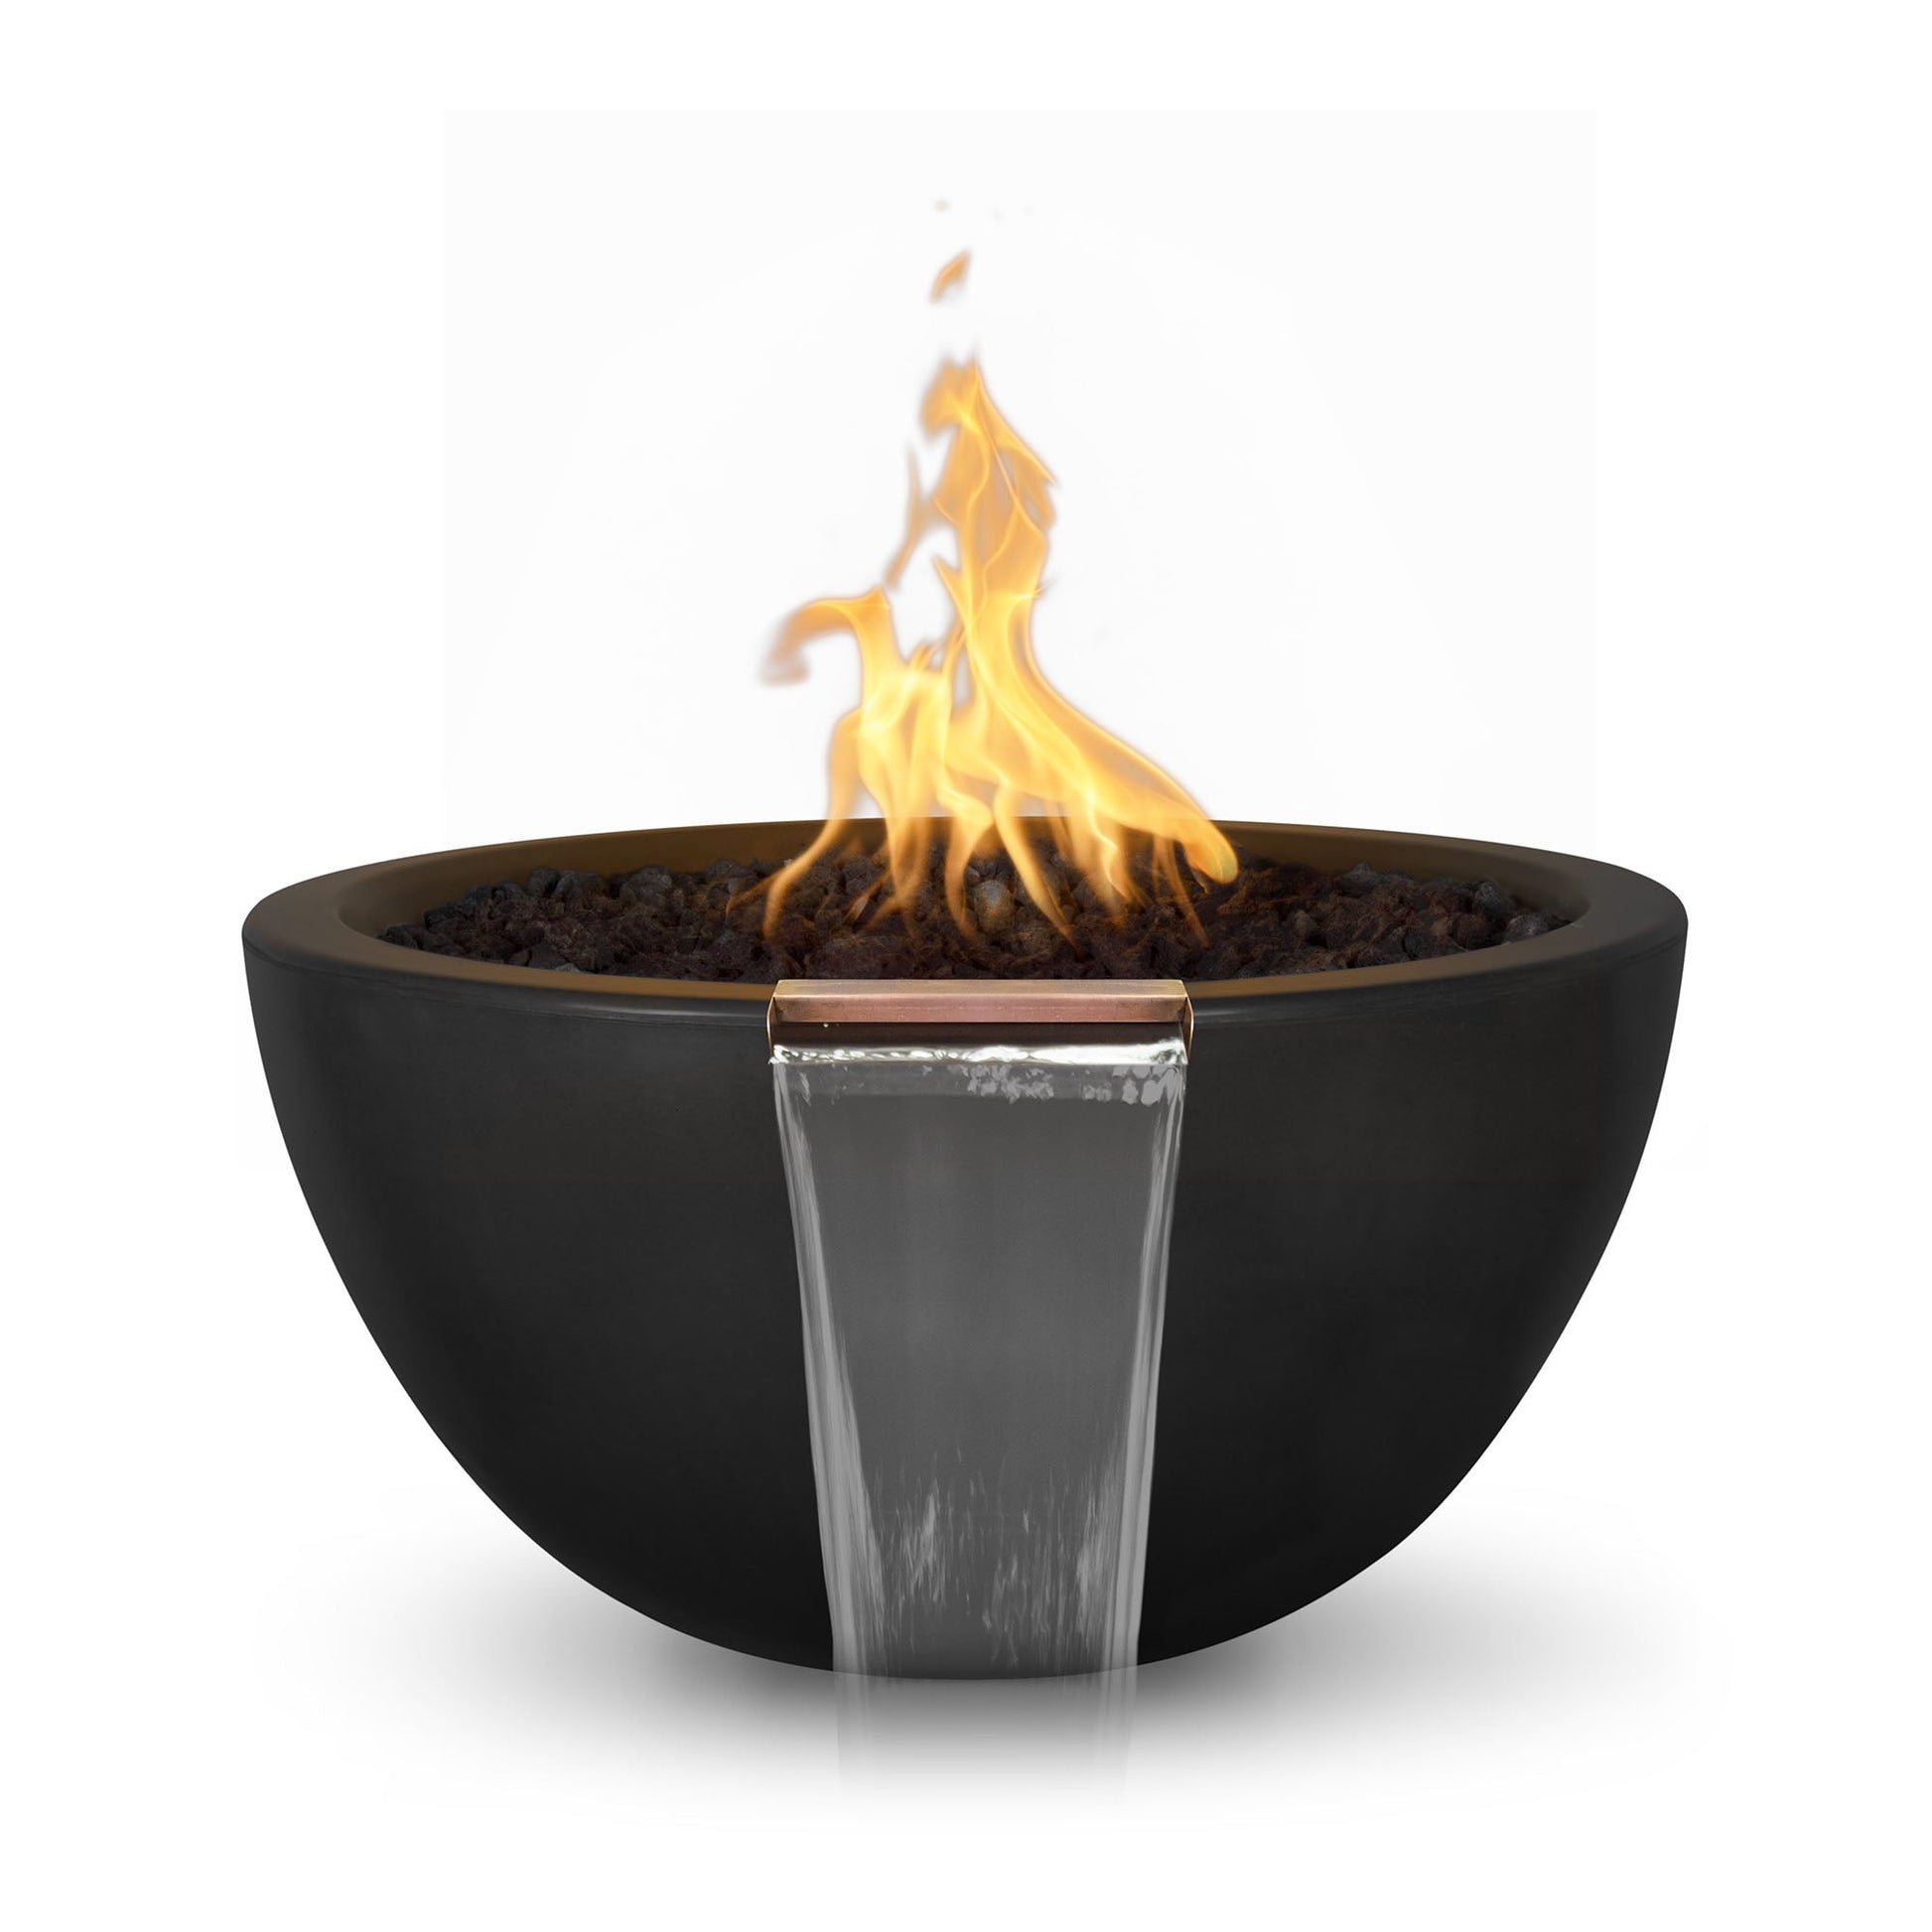 The Outdoor Plus Round Luna 38" Rustic Coffee GFRC Concrete Liquid Propane Fire & Water Bowl with Match Lit with Flame Sense Ignition